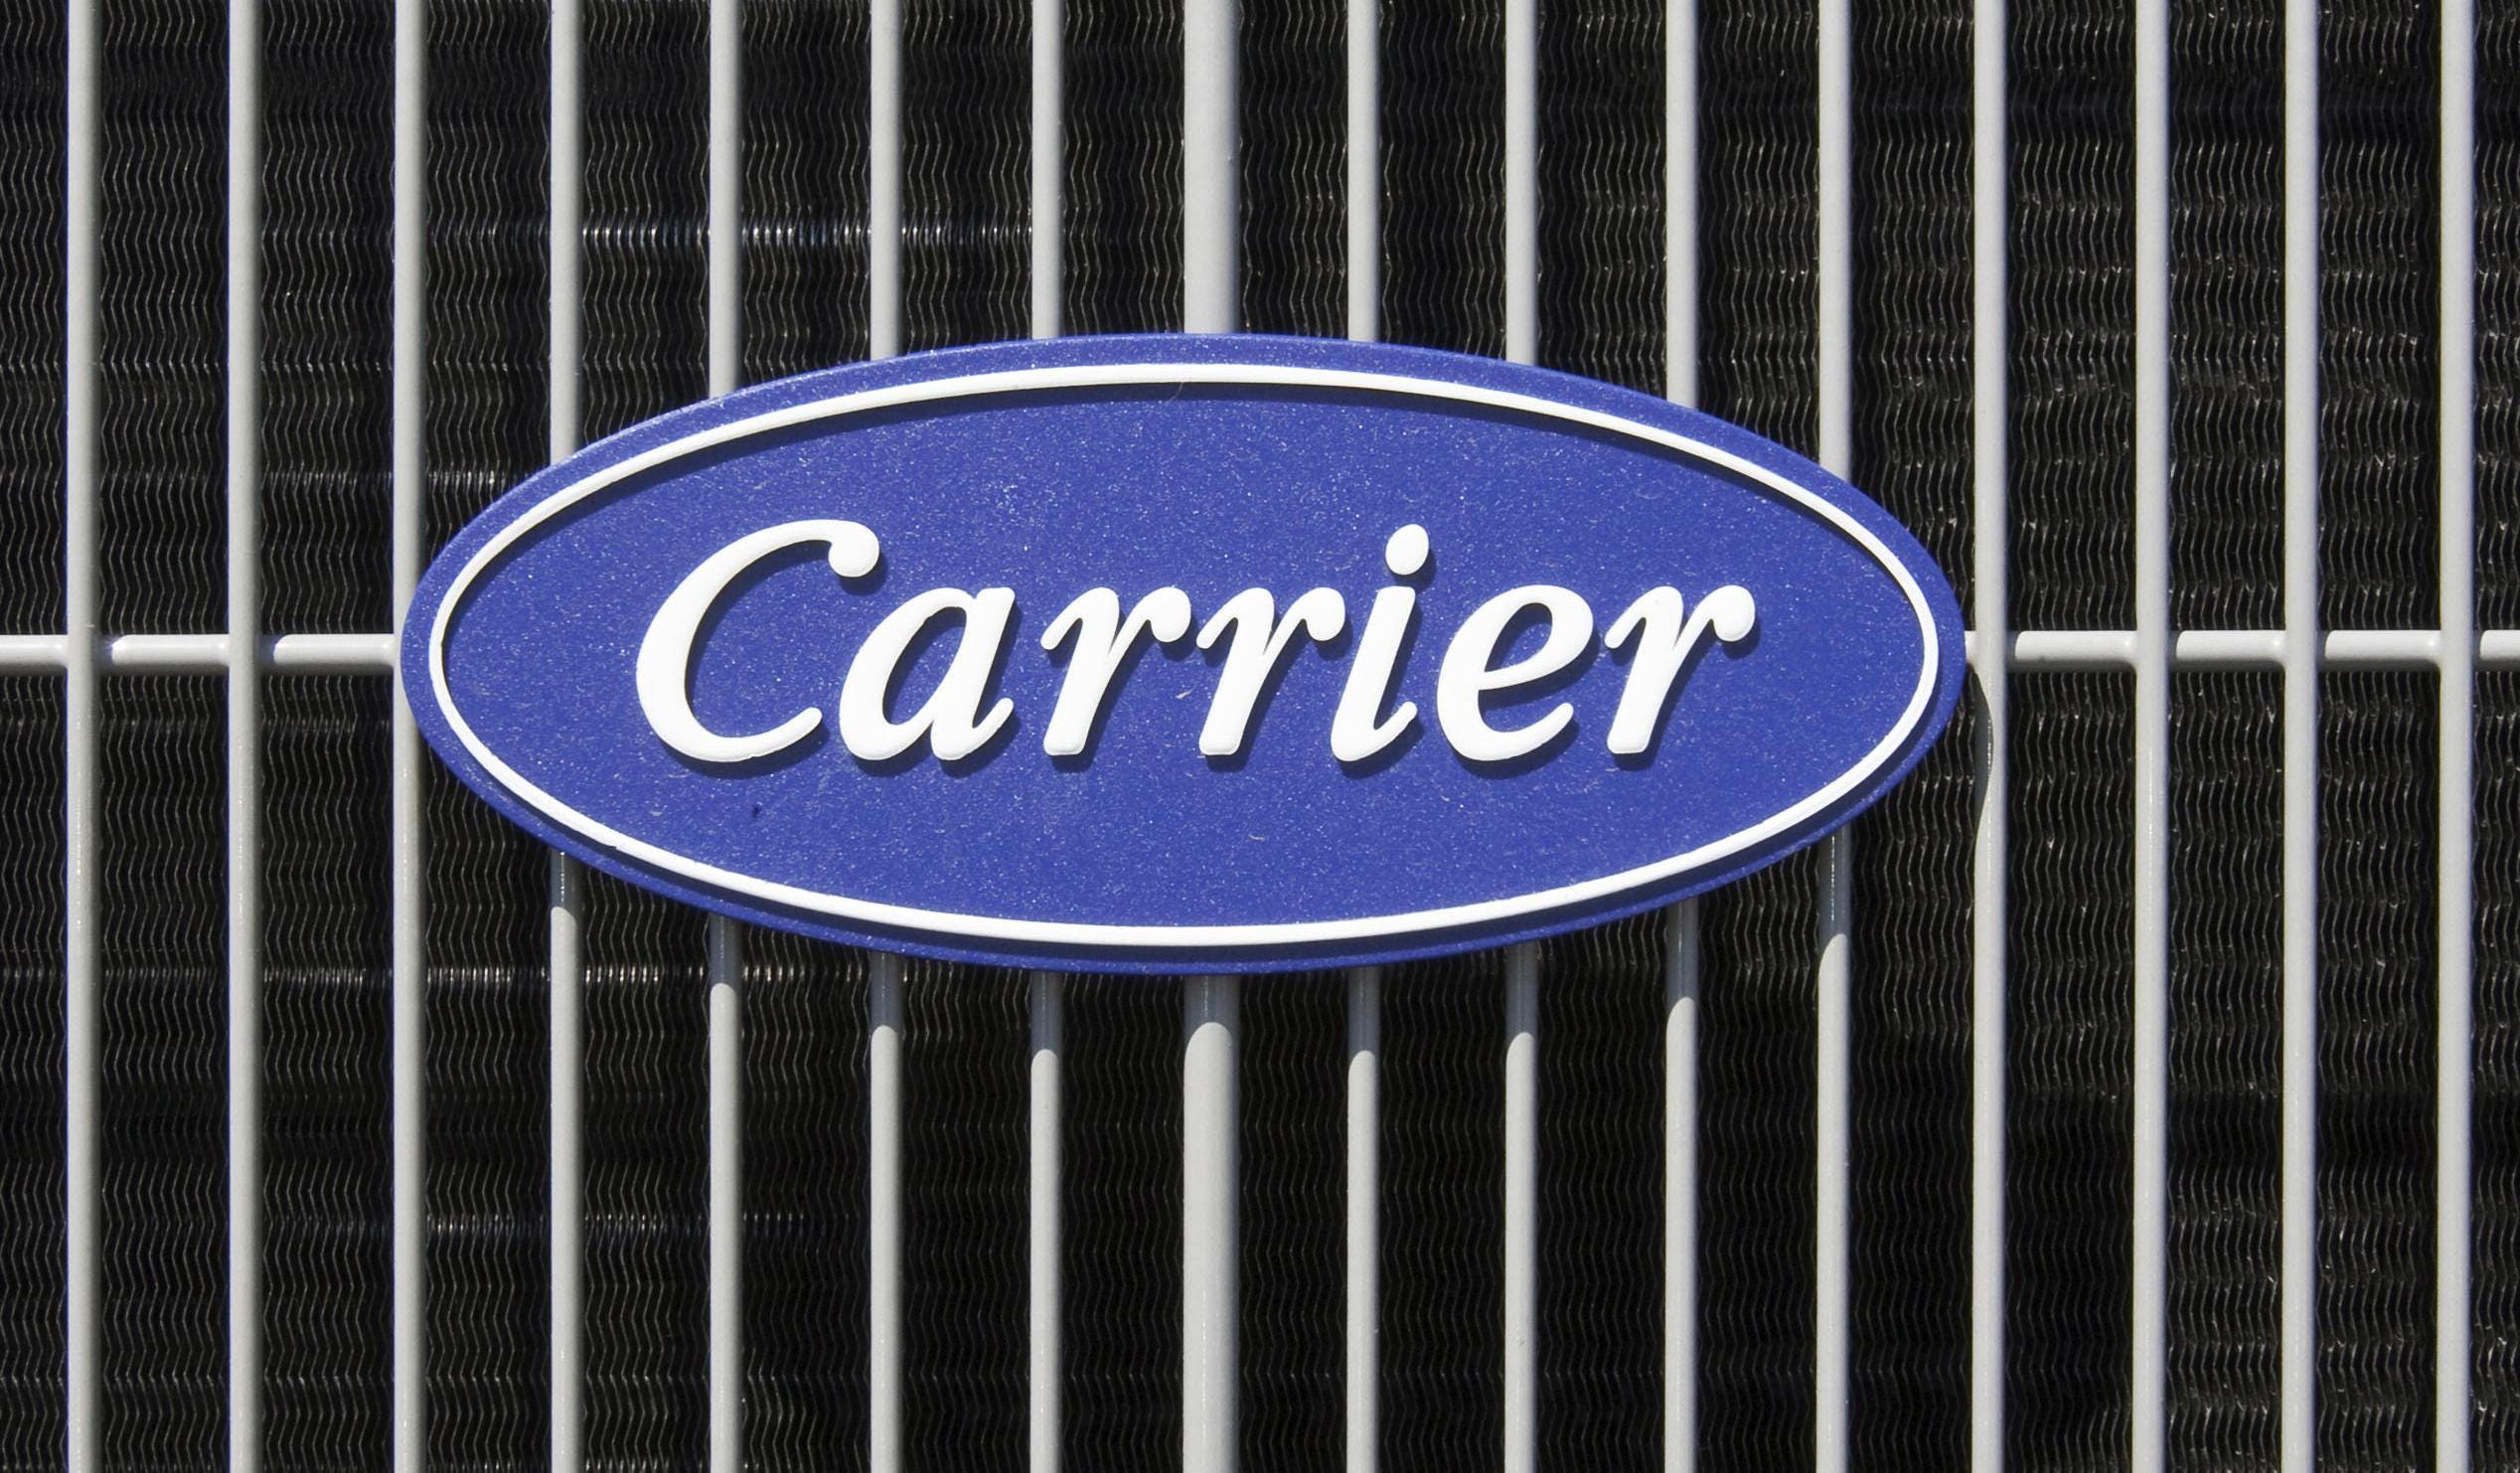 Carrier to begin laying off 600 employees this summer